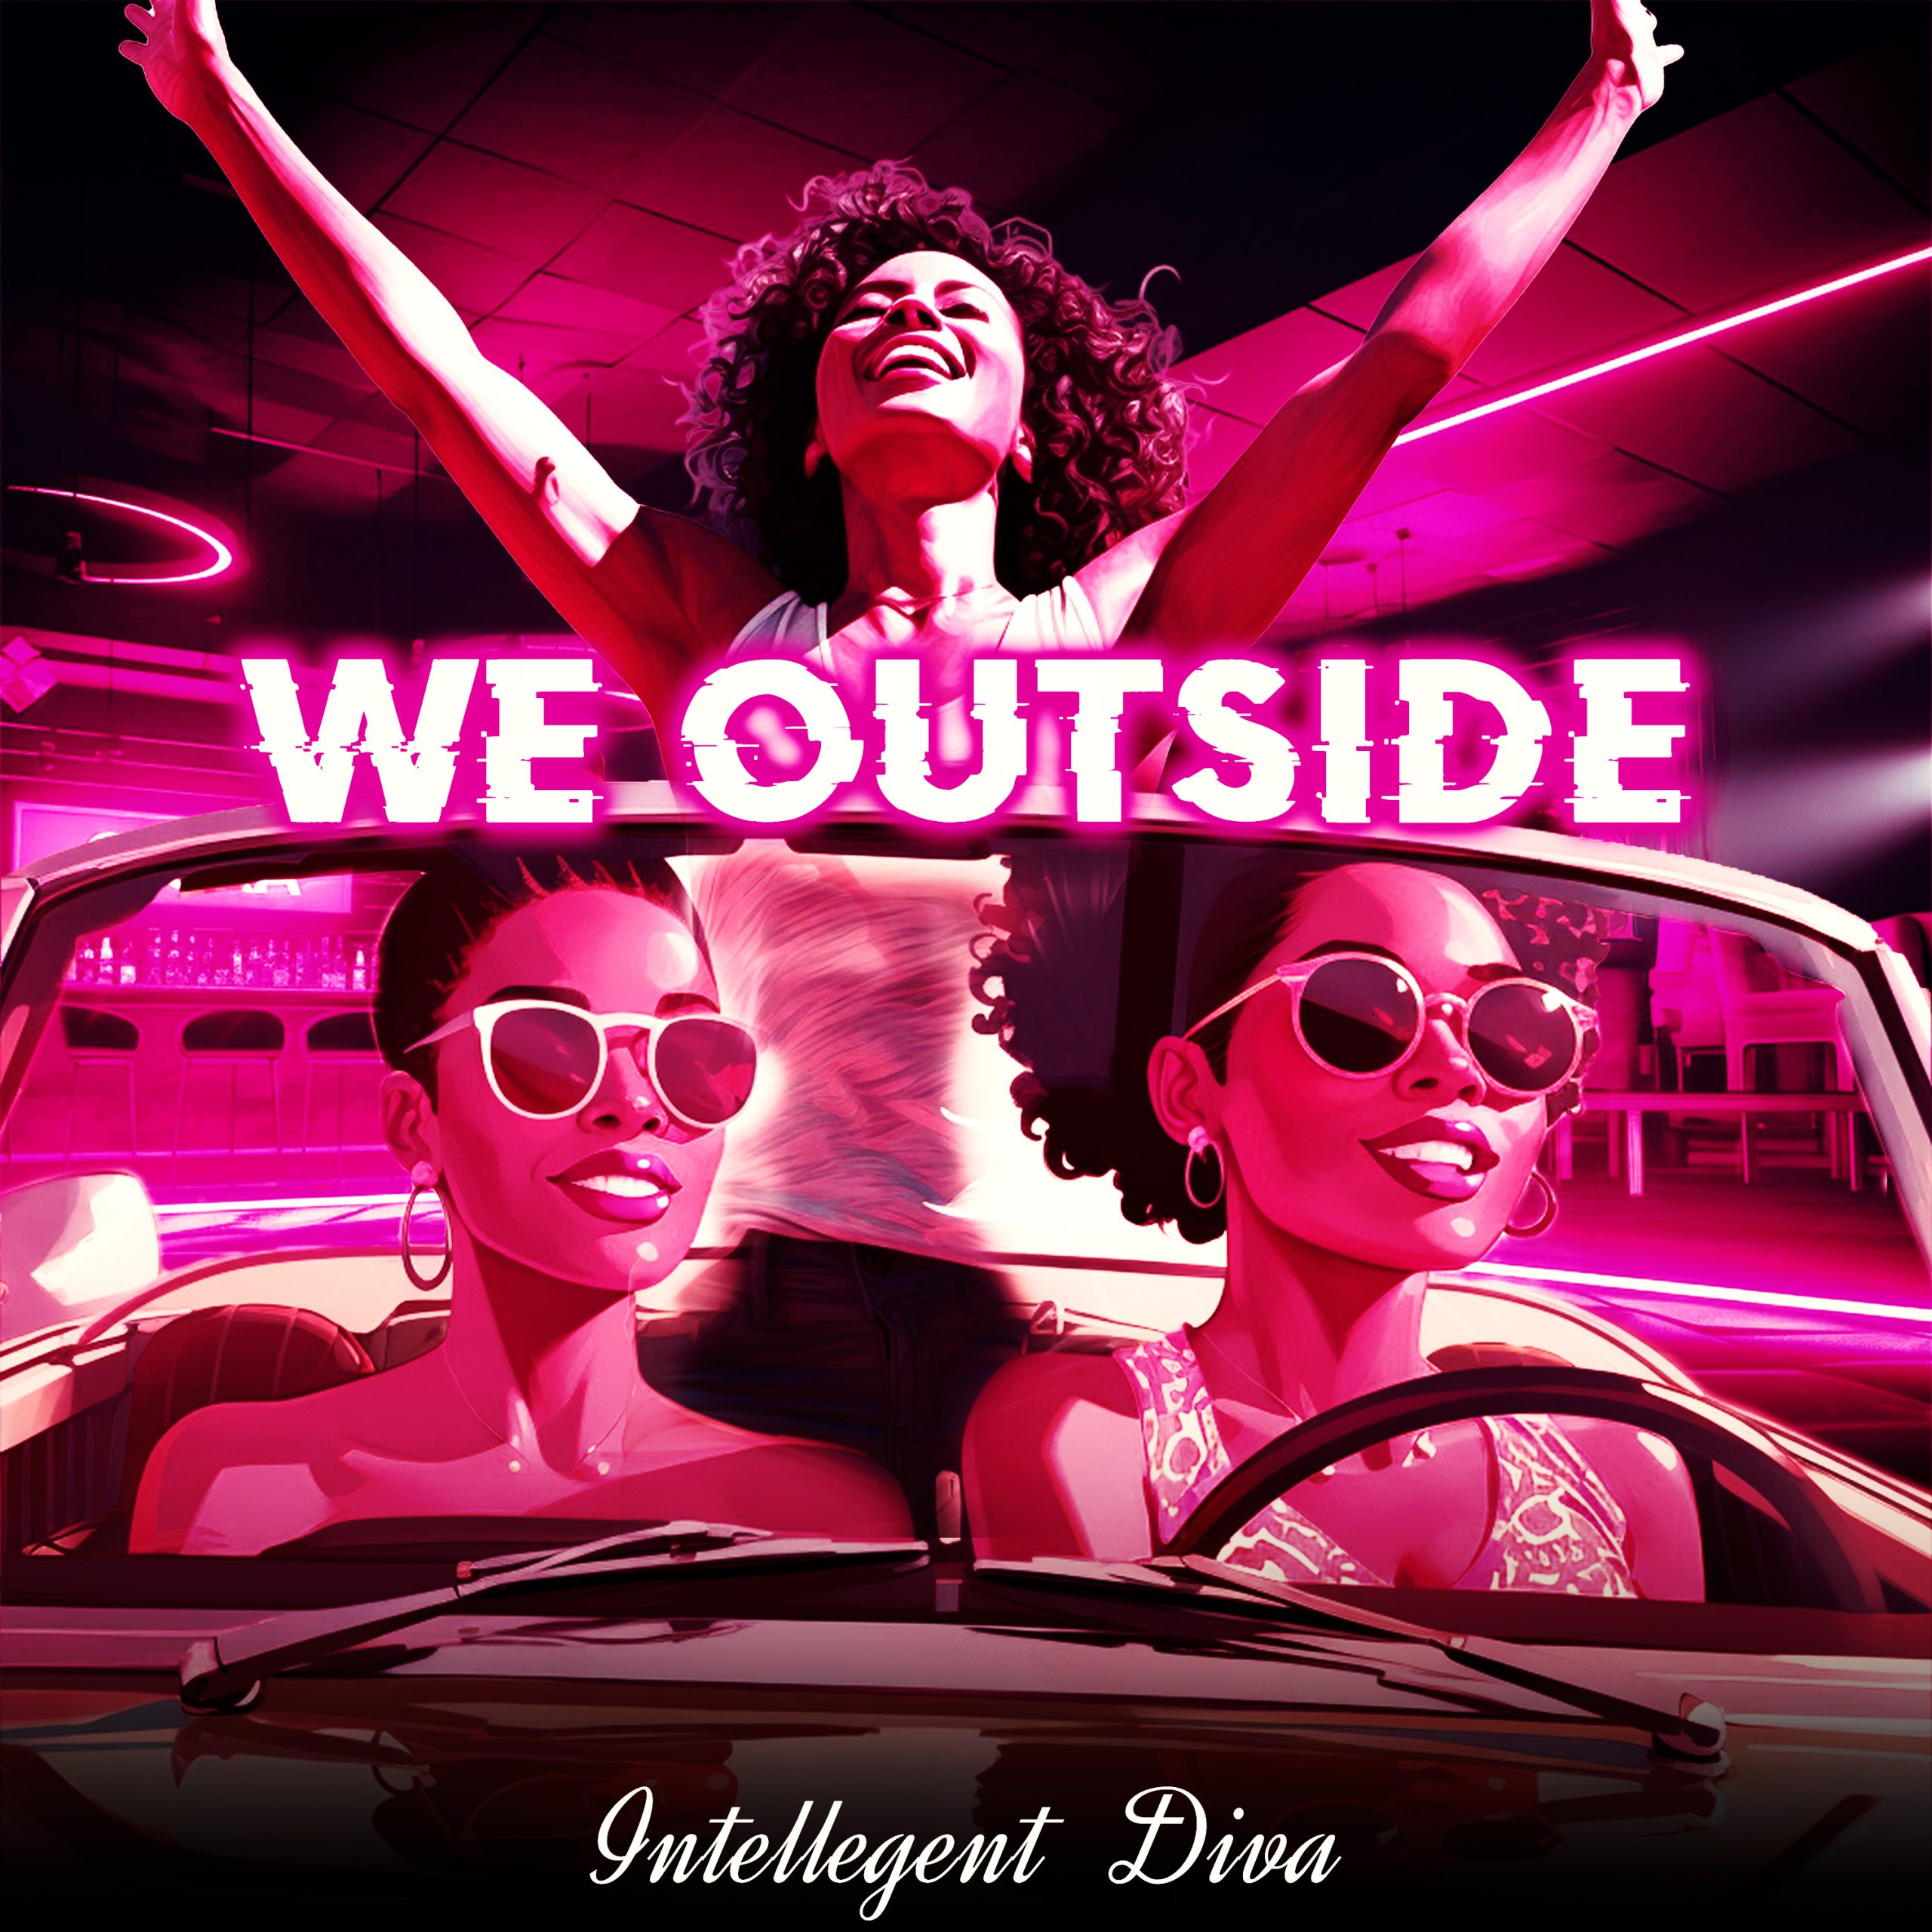 ‘Intelligent Diva’ is back as she pushes boundaries and fuses genres with new single ‘We Outside’.